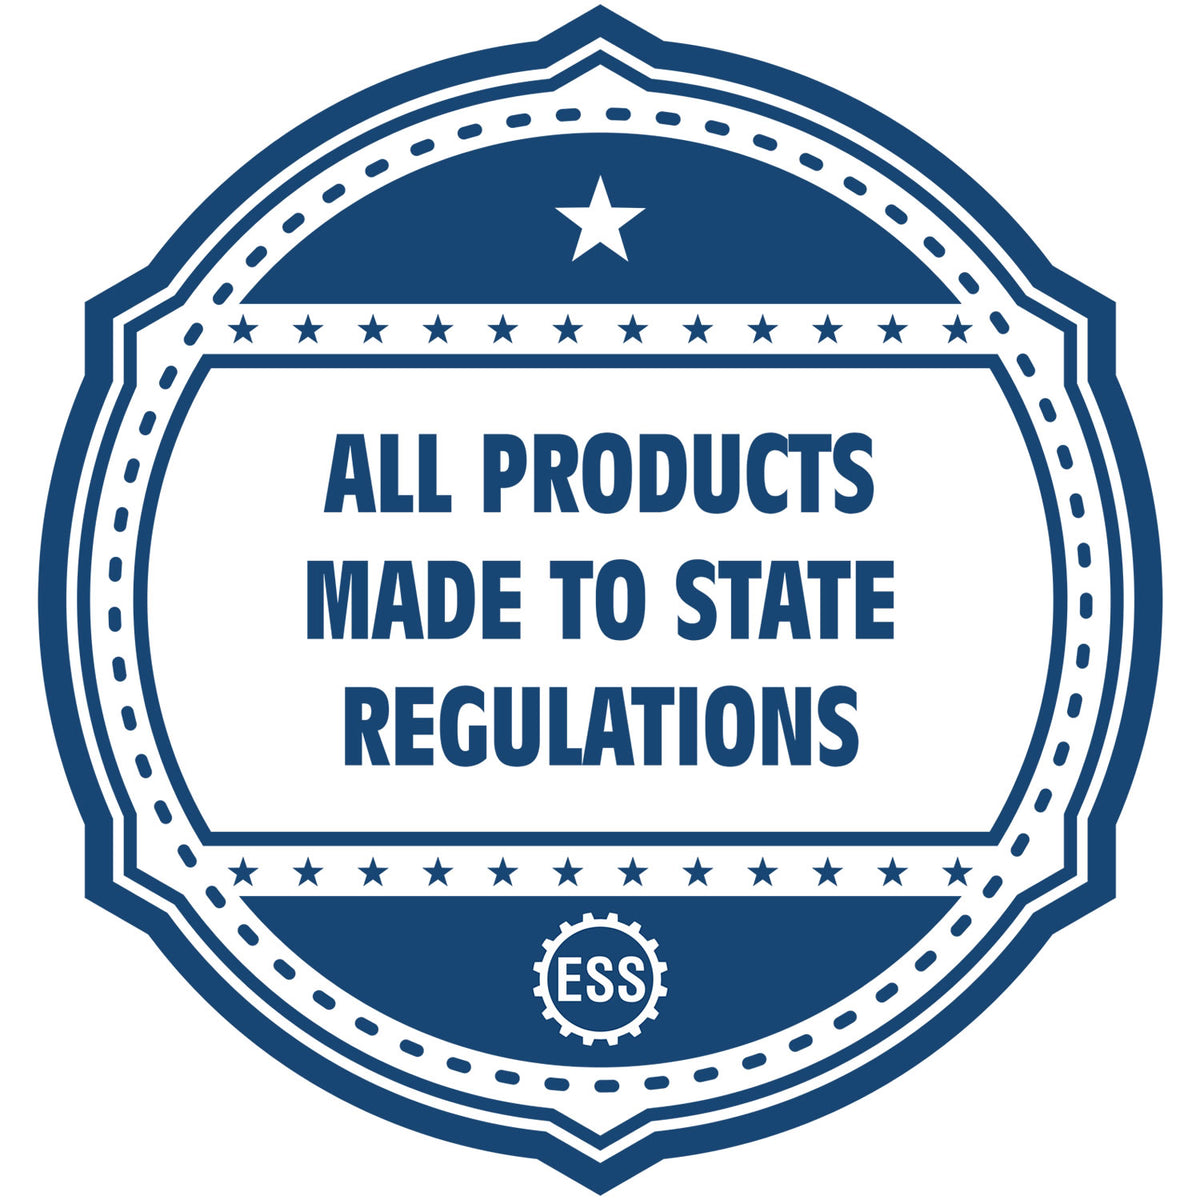 An icon or badge element for the Self-Inking Guam PE Stamp showing that this product is made in compliance with state regulations.